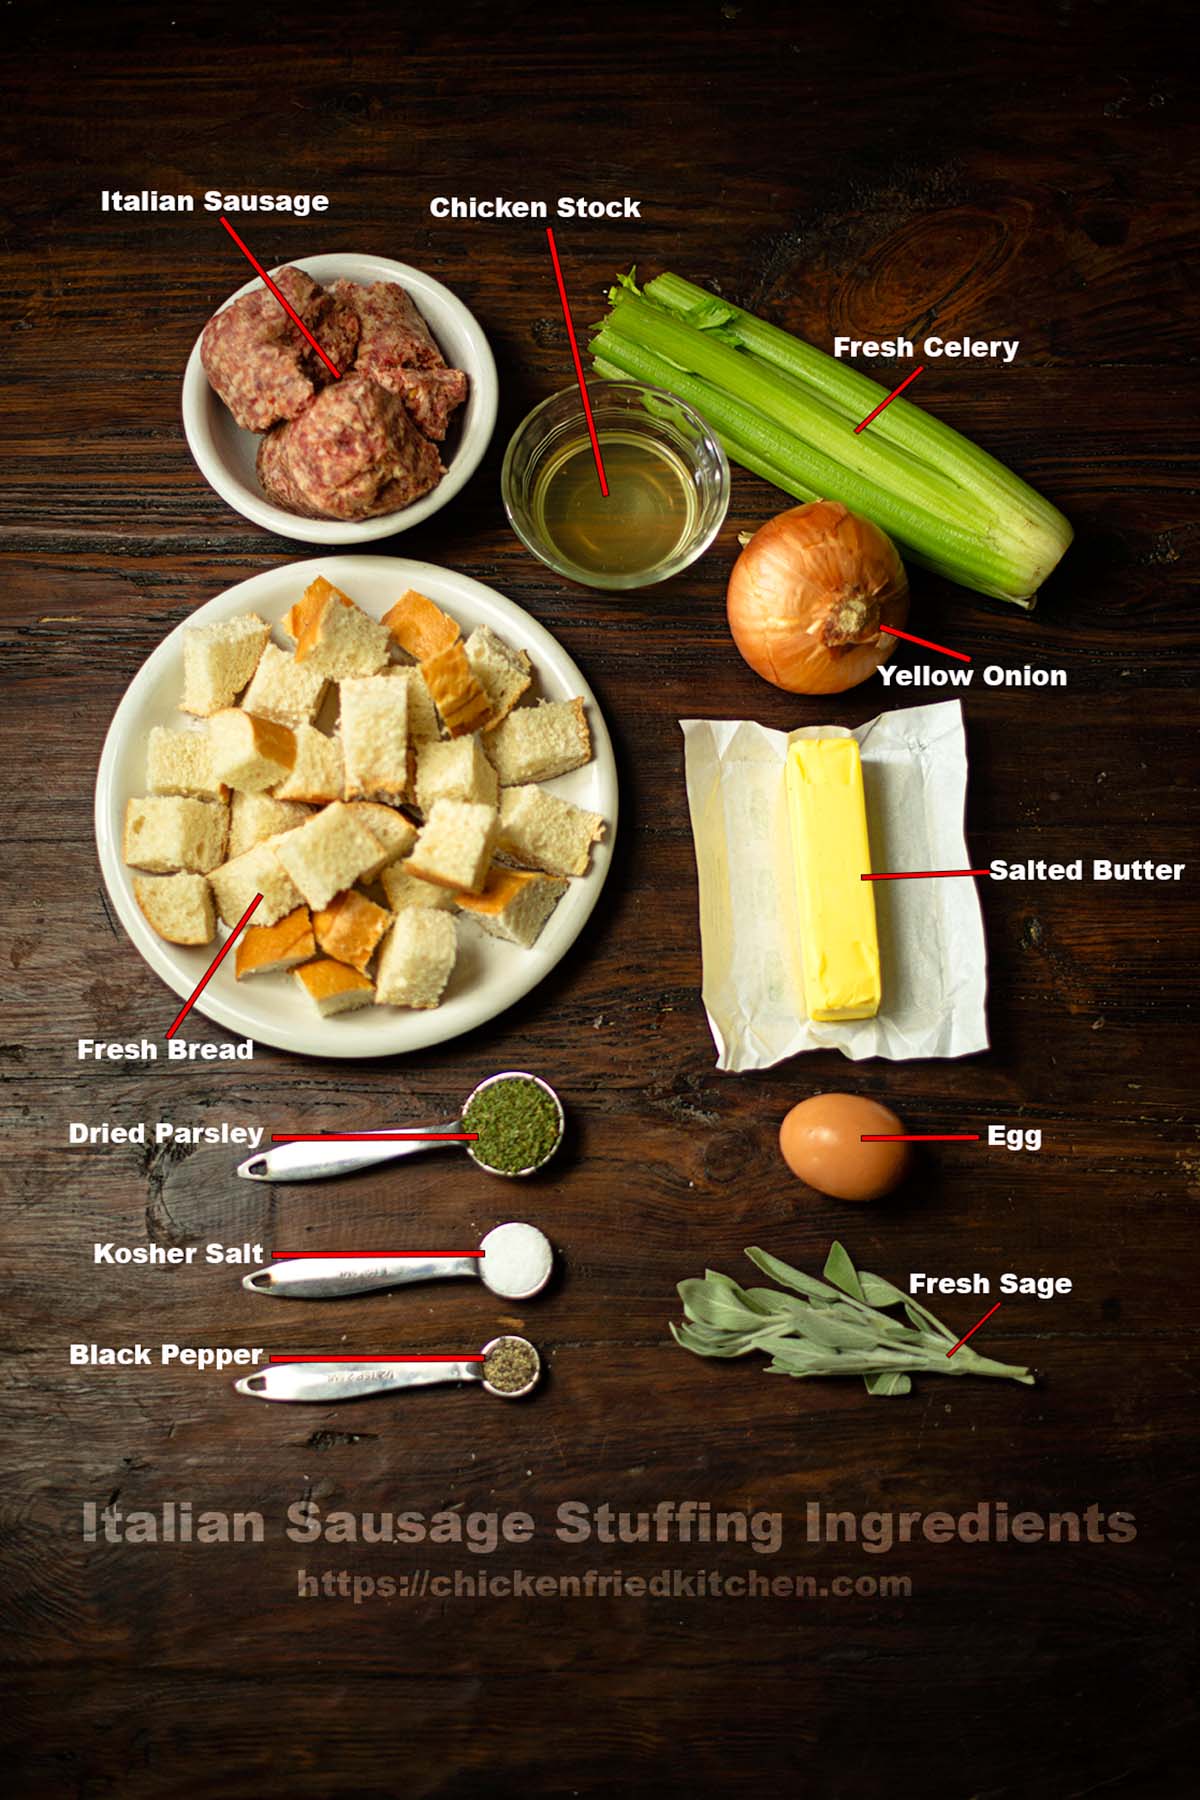 Italian Sausage Stuffing ingredients pictured and listed.